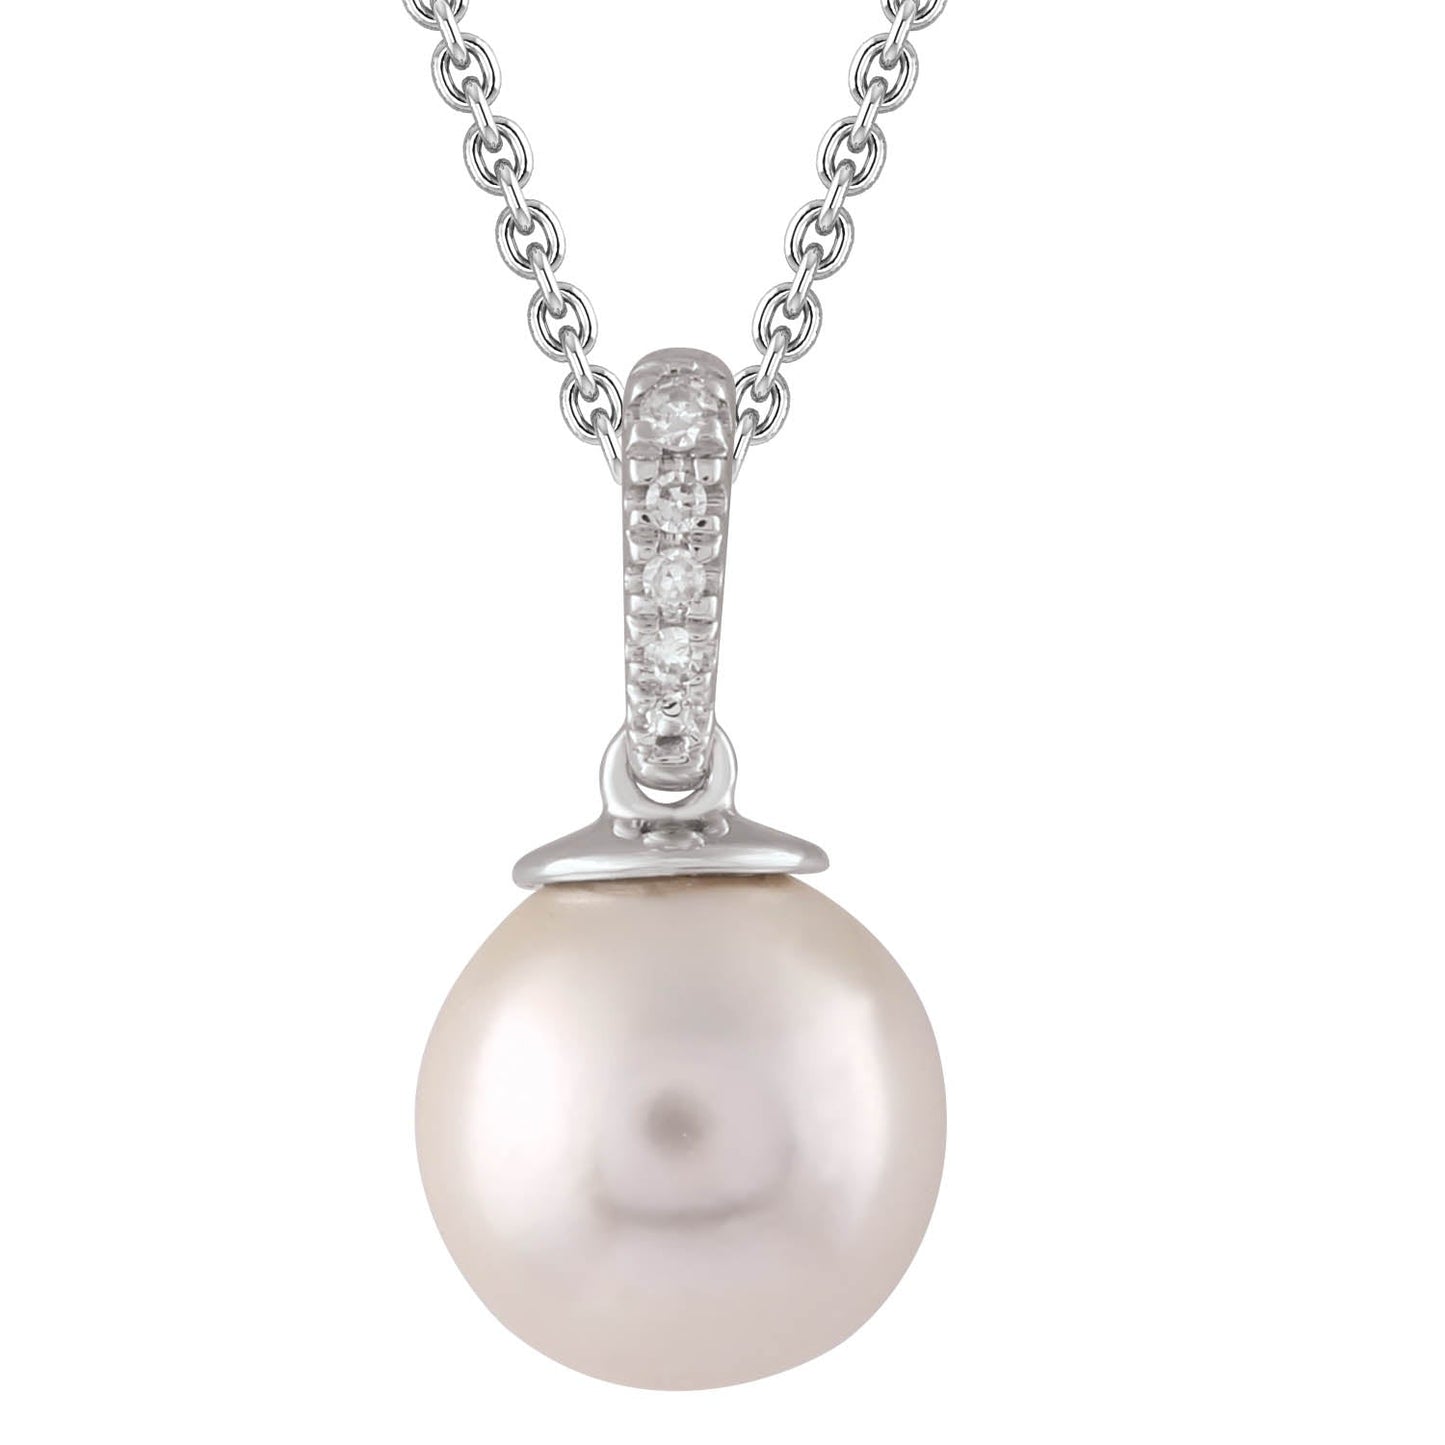 Diamond Pearl Necklace with 0.01ct Diamonds in 9K White Gold - N-20564-001-W